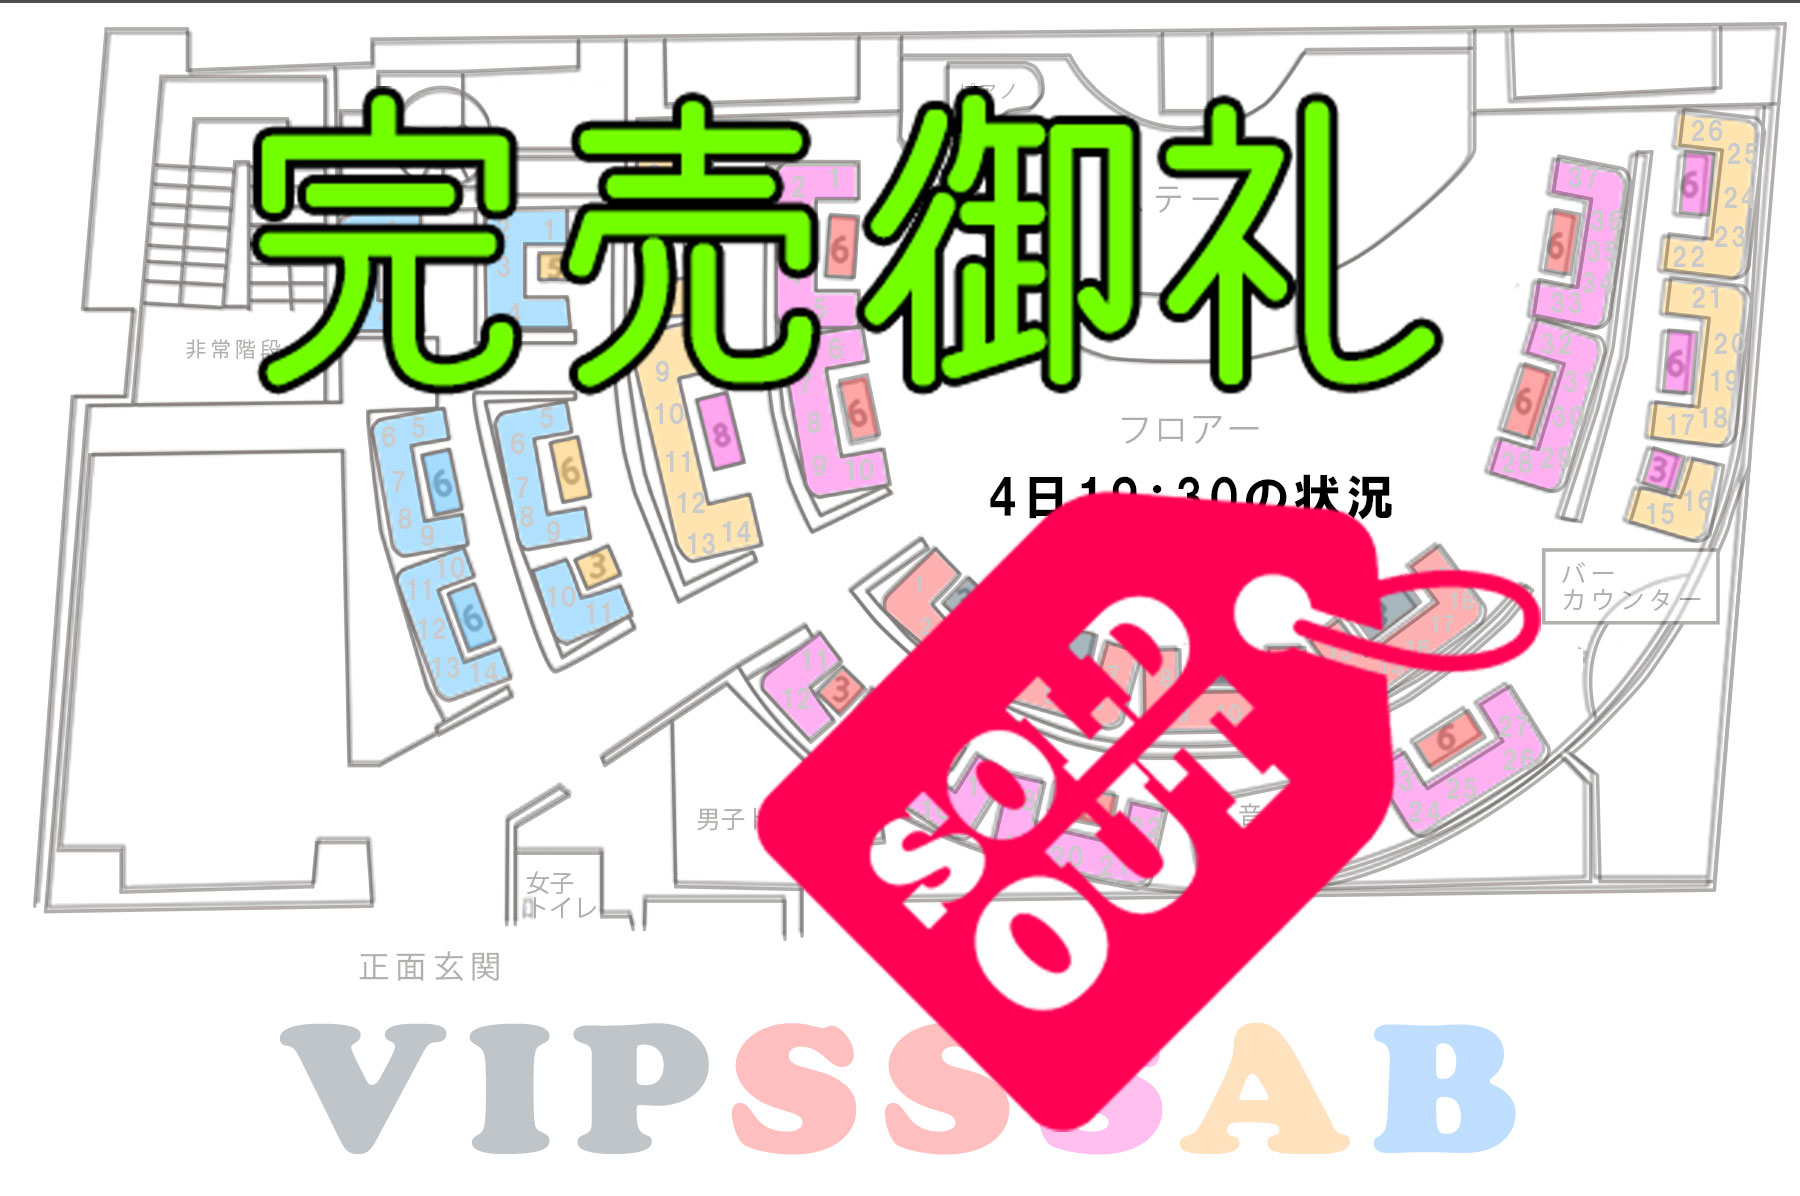 sold out for 1st floor ticket 7thevet